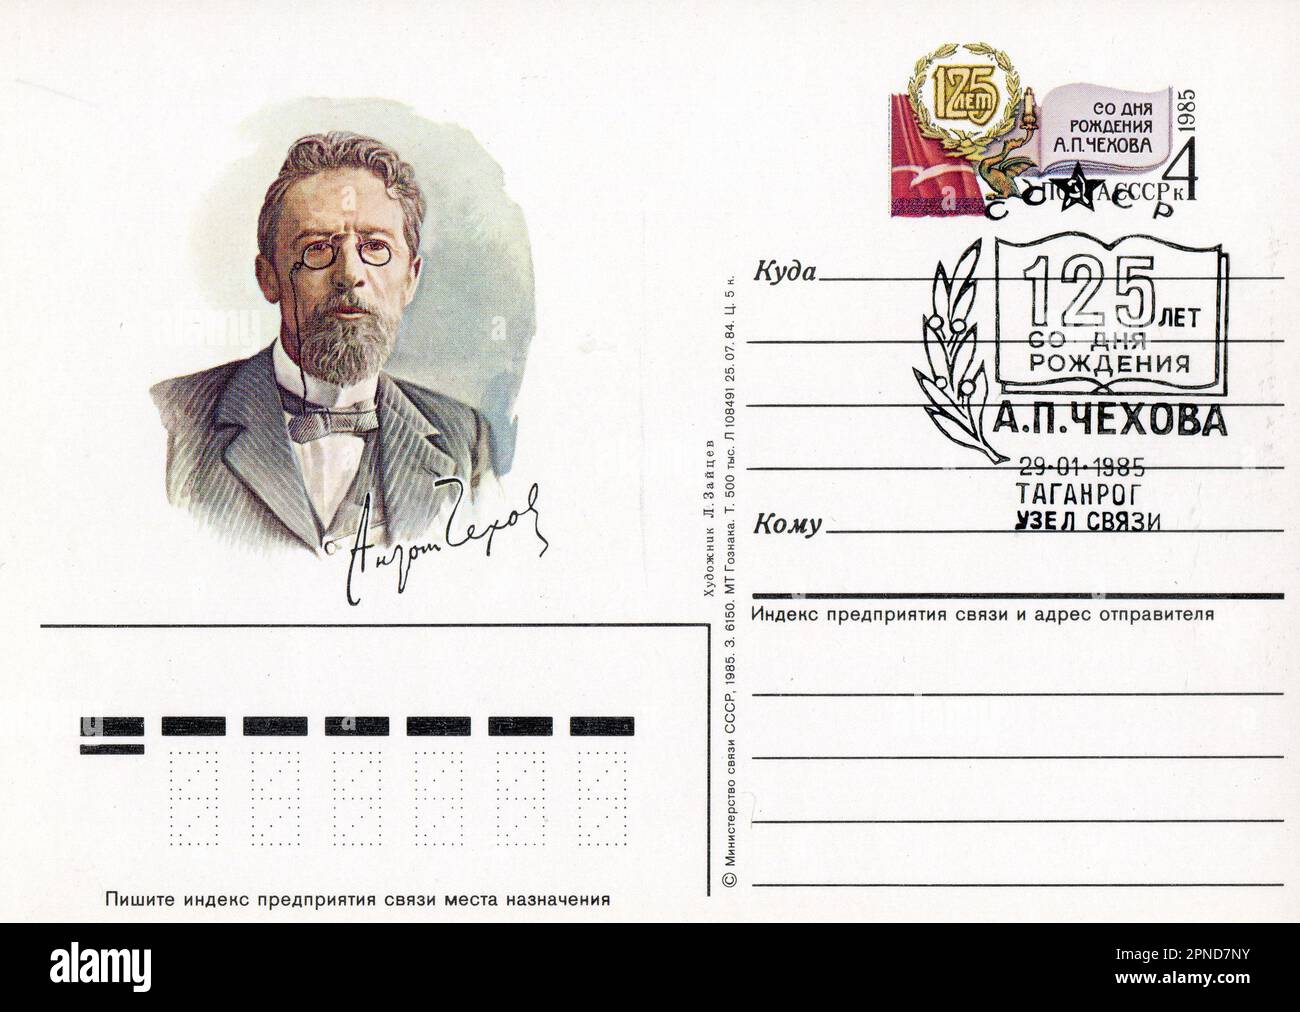 Anton Pavlovich Chekhov (Russian: Антон Павлович Чехов; 29 January 1860 – 15 July 1904) was a Russian playwright and short-story writer who is considered to be one of the greatest writers of all time. FDC Old Vintage postcard of the USSR, 1985. Stock Photo